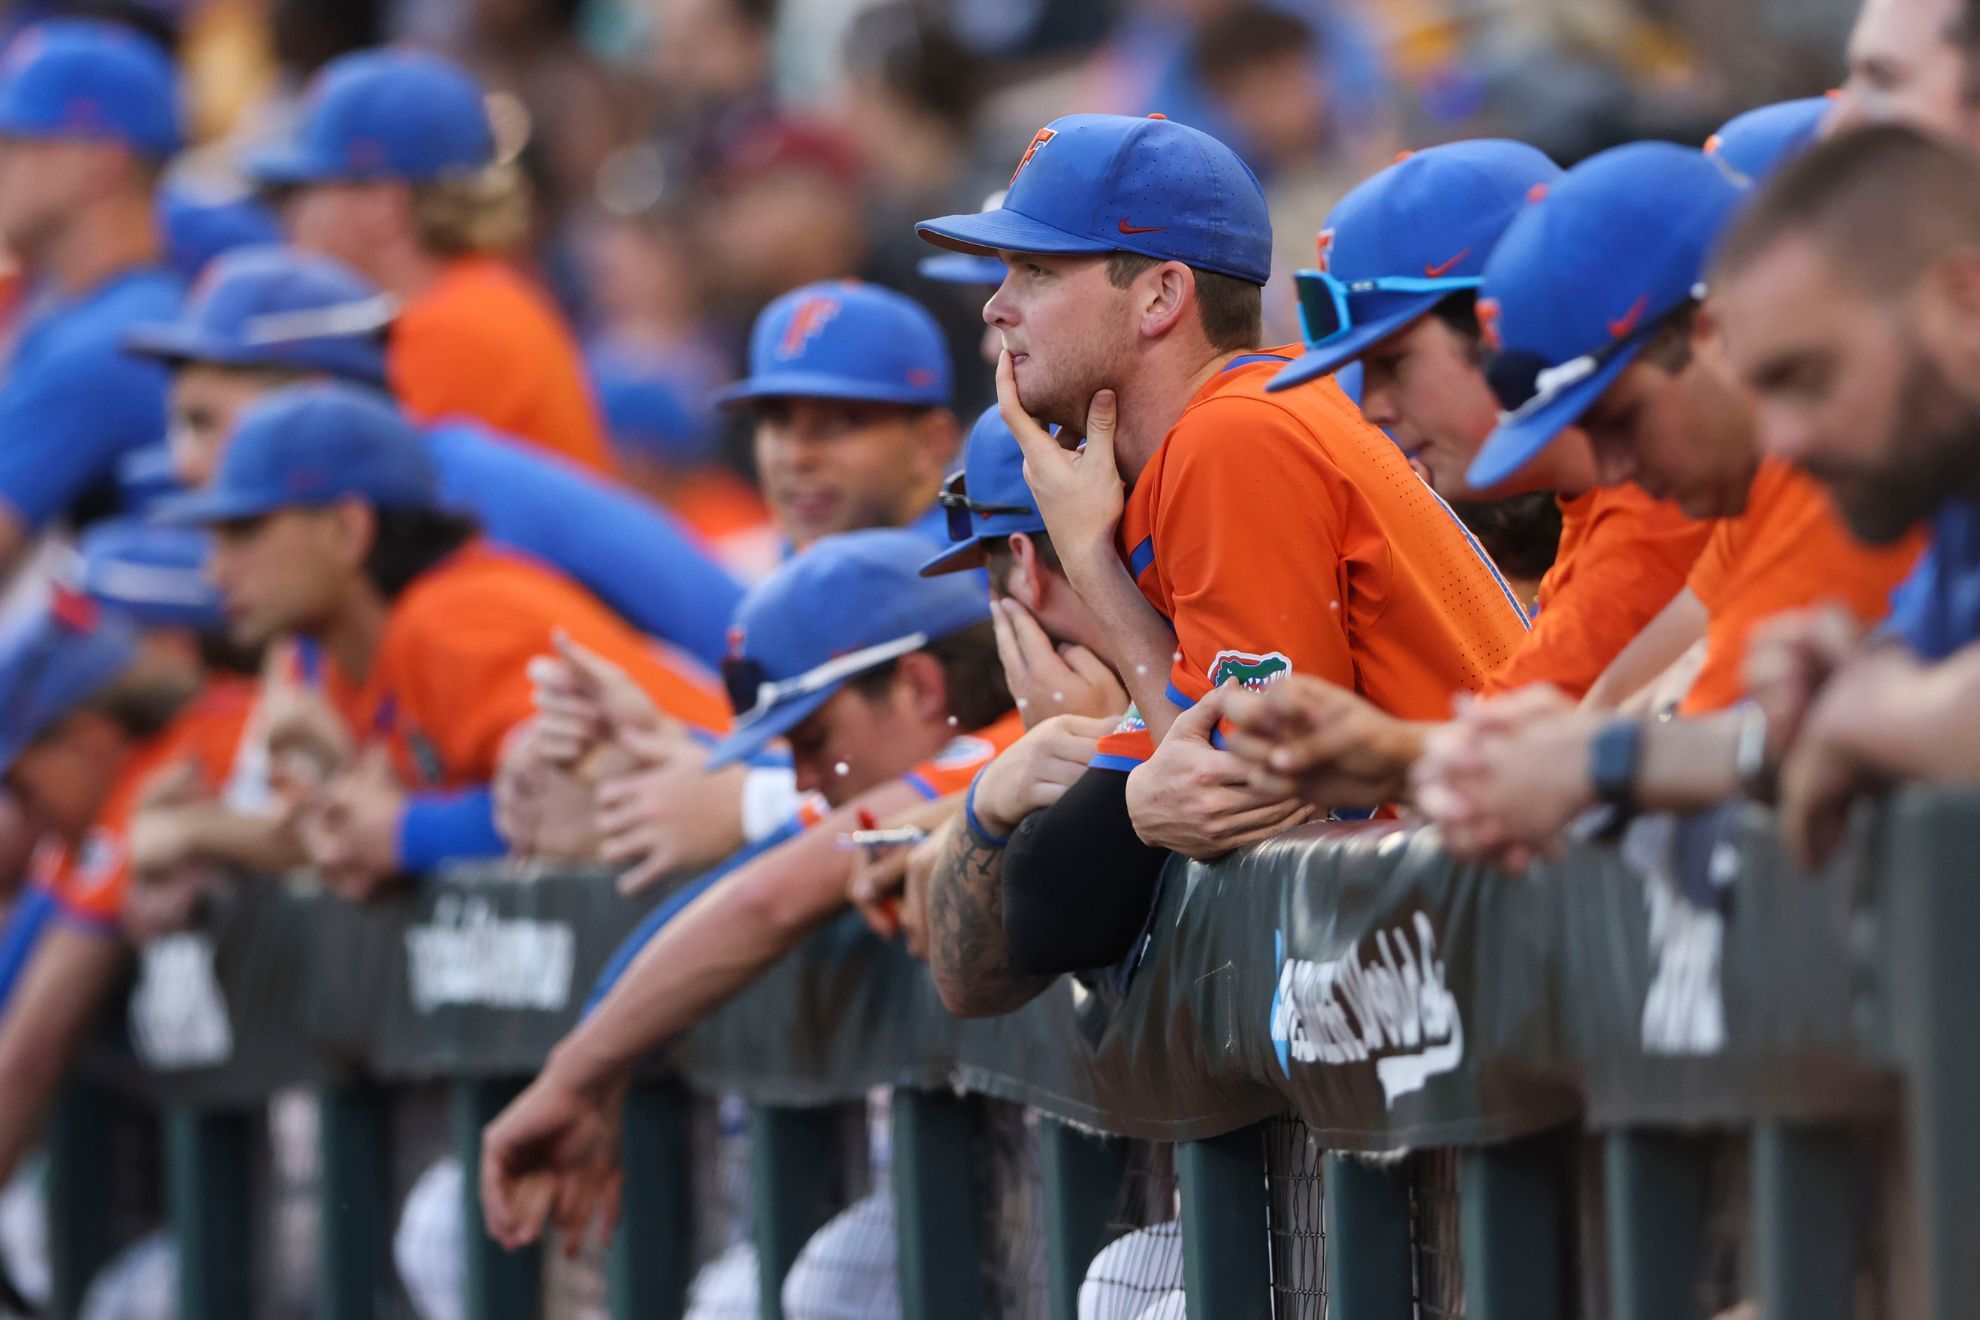 Gators join long list of Florida teams to lose a final this past month